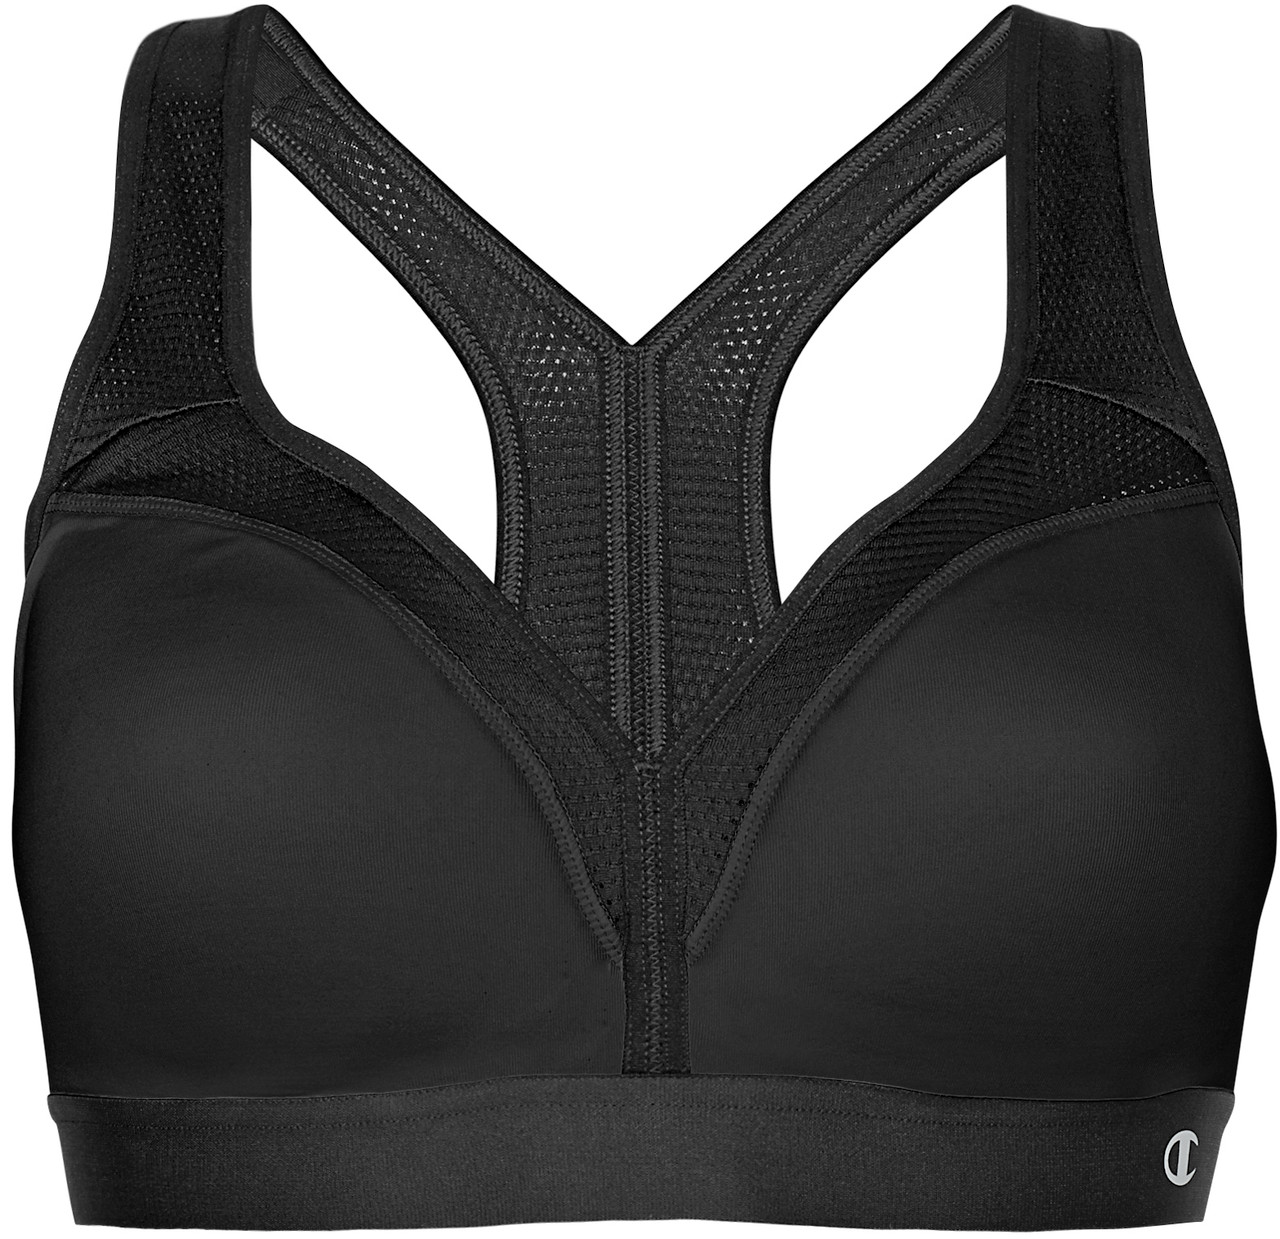 Champion 2 Sports Bras Small Moderate Support Black White for sale online